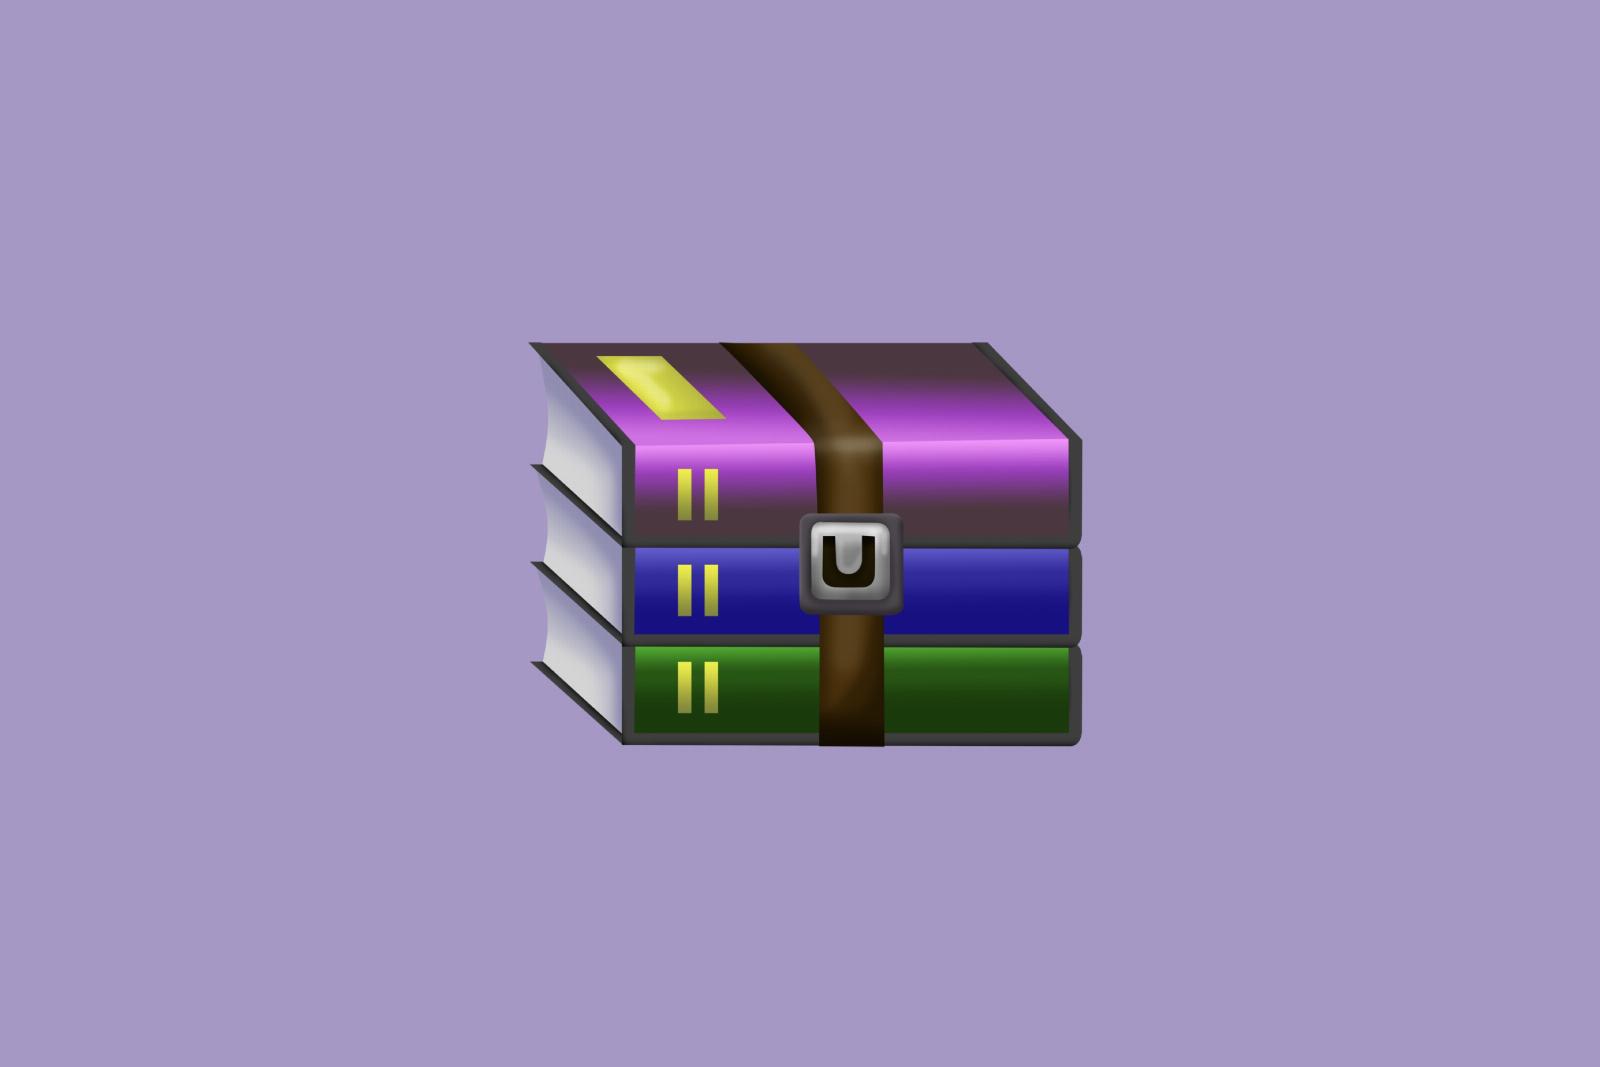 Hackers exploit WinRAR zero-day bug to steal funds from broker accounts